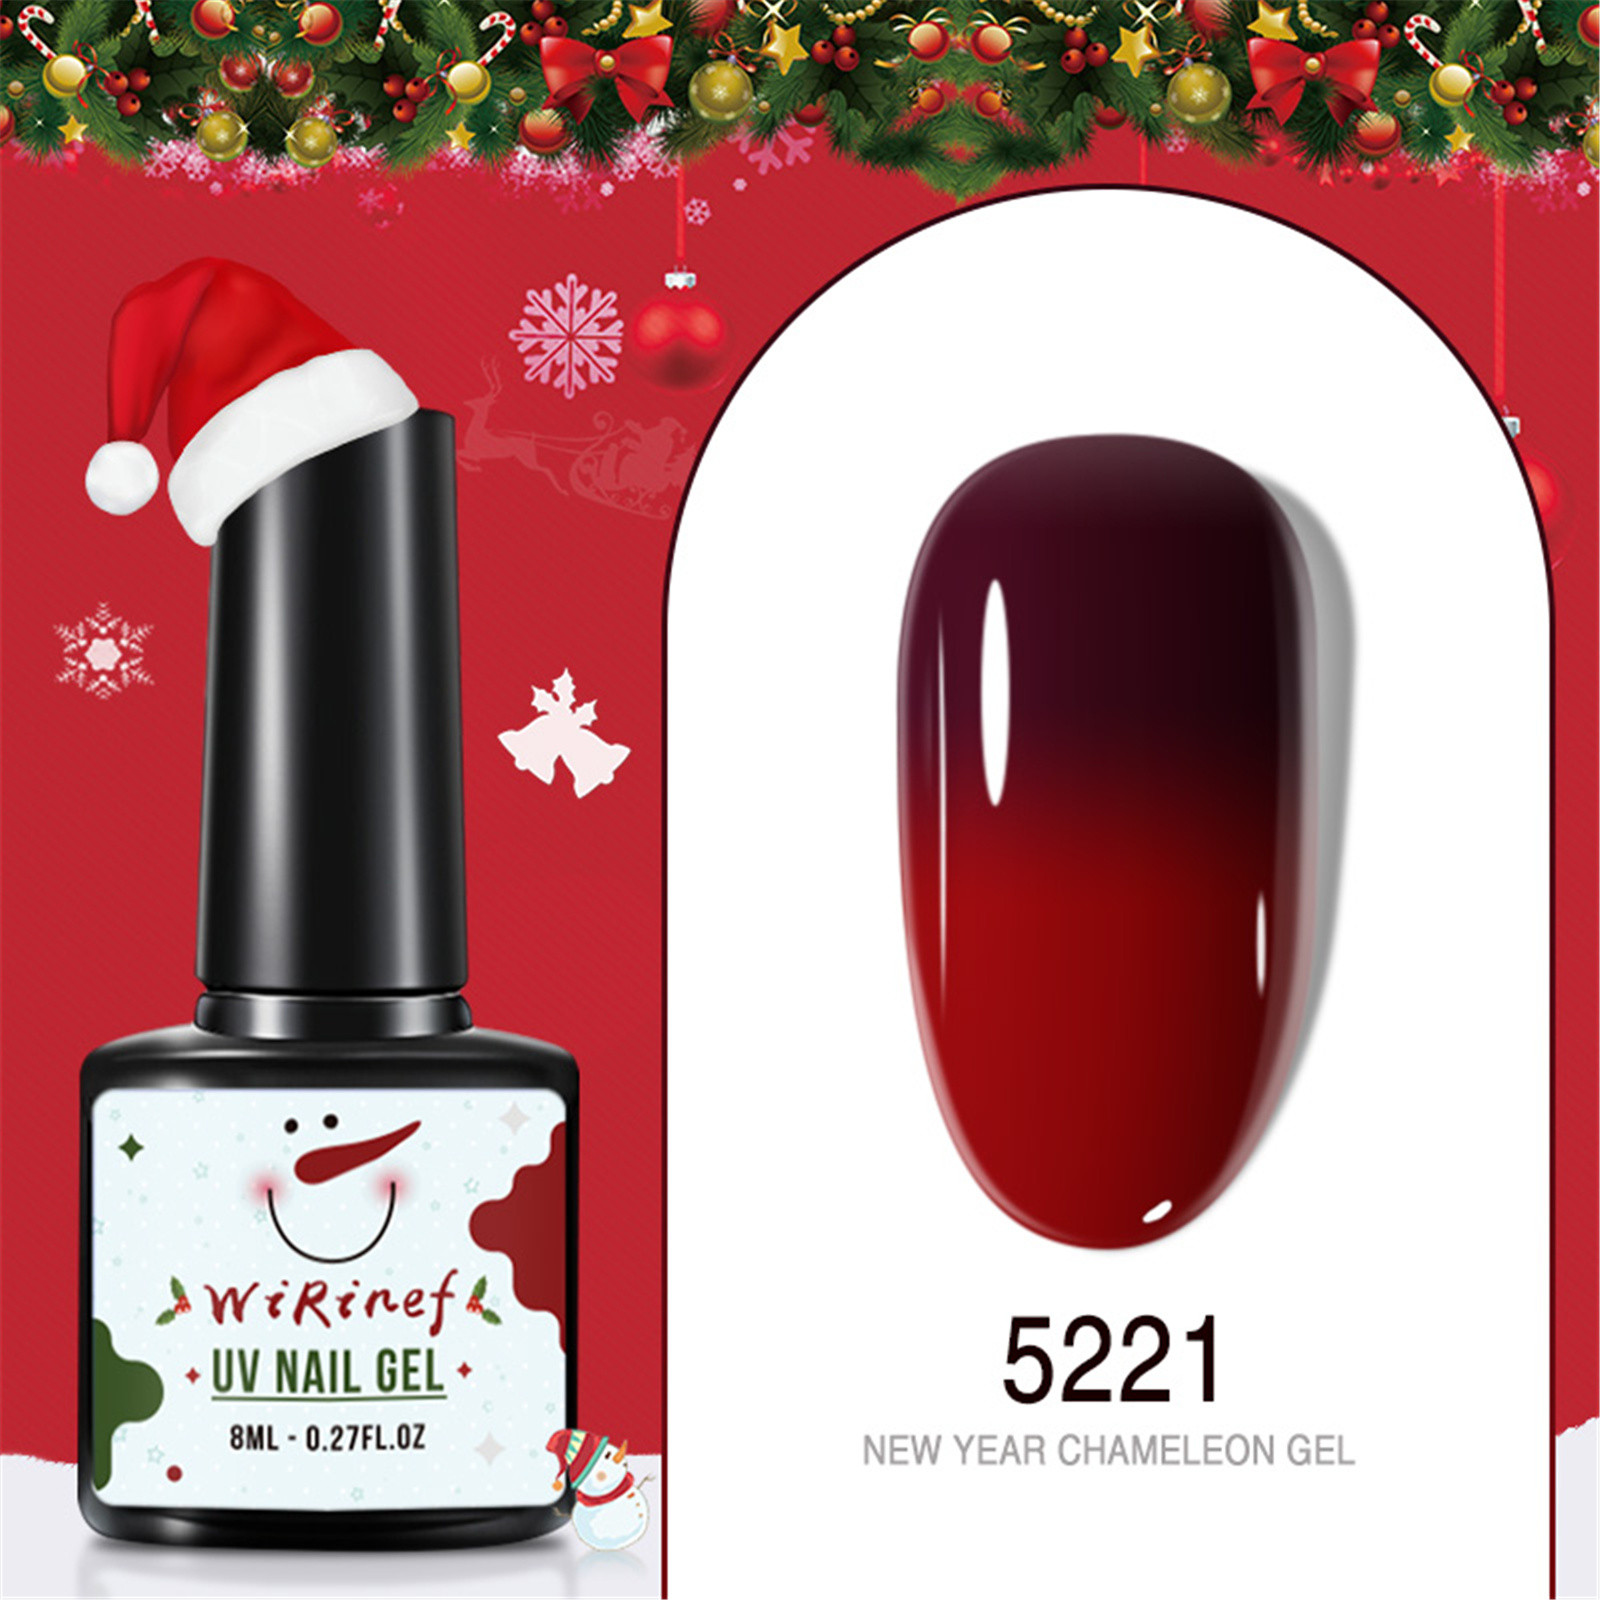 Tejiojio HoliDay Home Trends Christmas Manicure Nail Polish Glue Winter Snowman Color Changing Phototherapy Glue 8ML - image 1 of 3